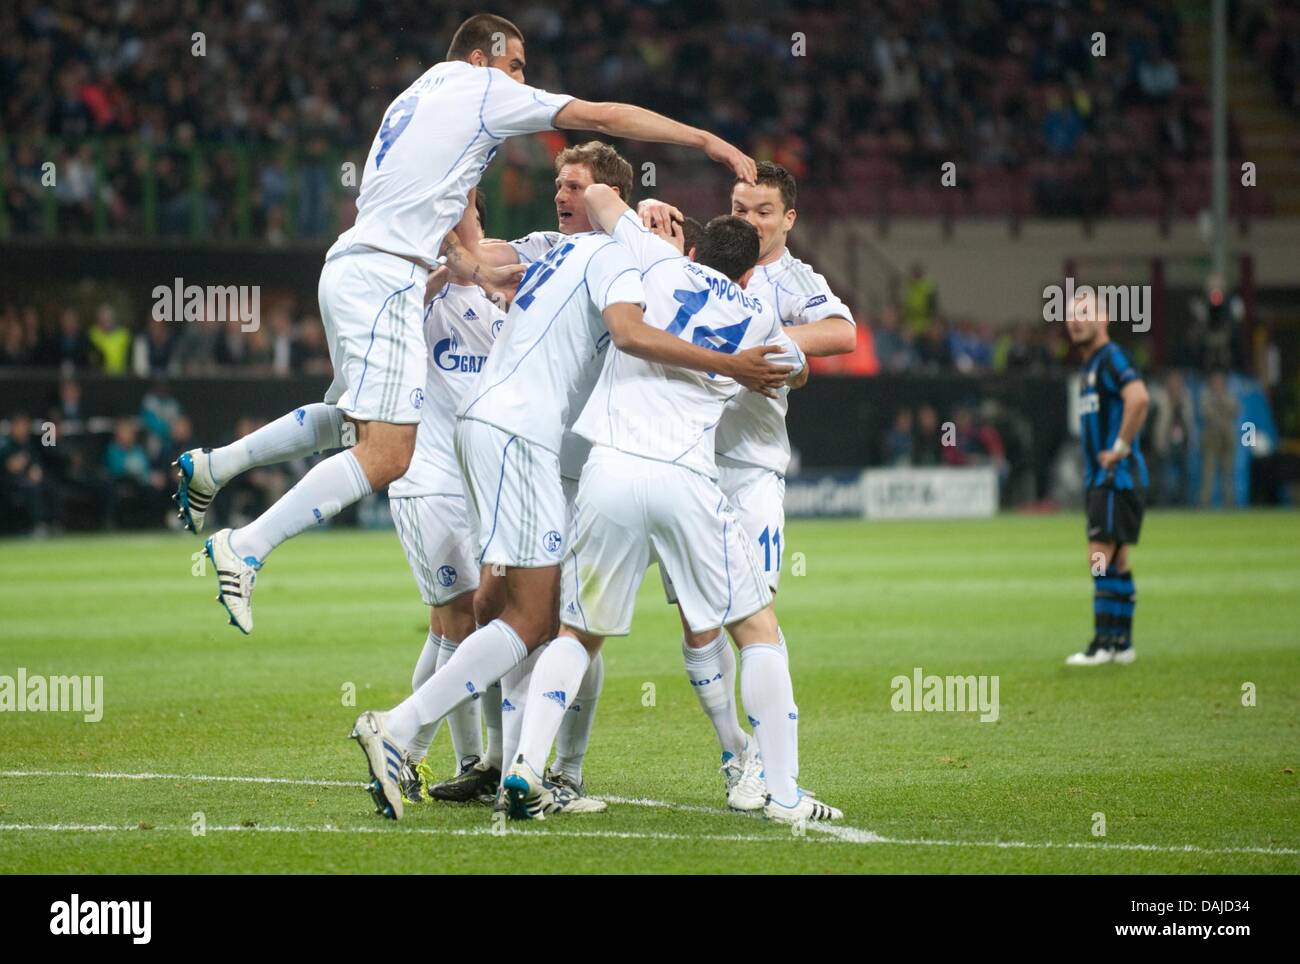 Schalke's player celebrates after 1:1 goal scored by Joel Matip (C , Nr. 32) during the Champions League quarter final first leg soccer match between Inter Milan and Schalke 04 at the Giuseppe Meazza stadium in Milan, Italy, 5 April 2011. Photo: Bernd Thissen Stock Photo